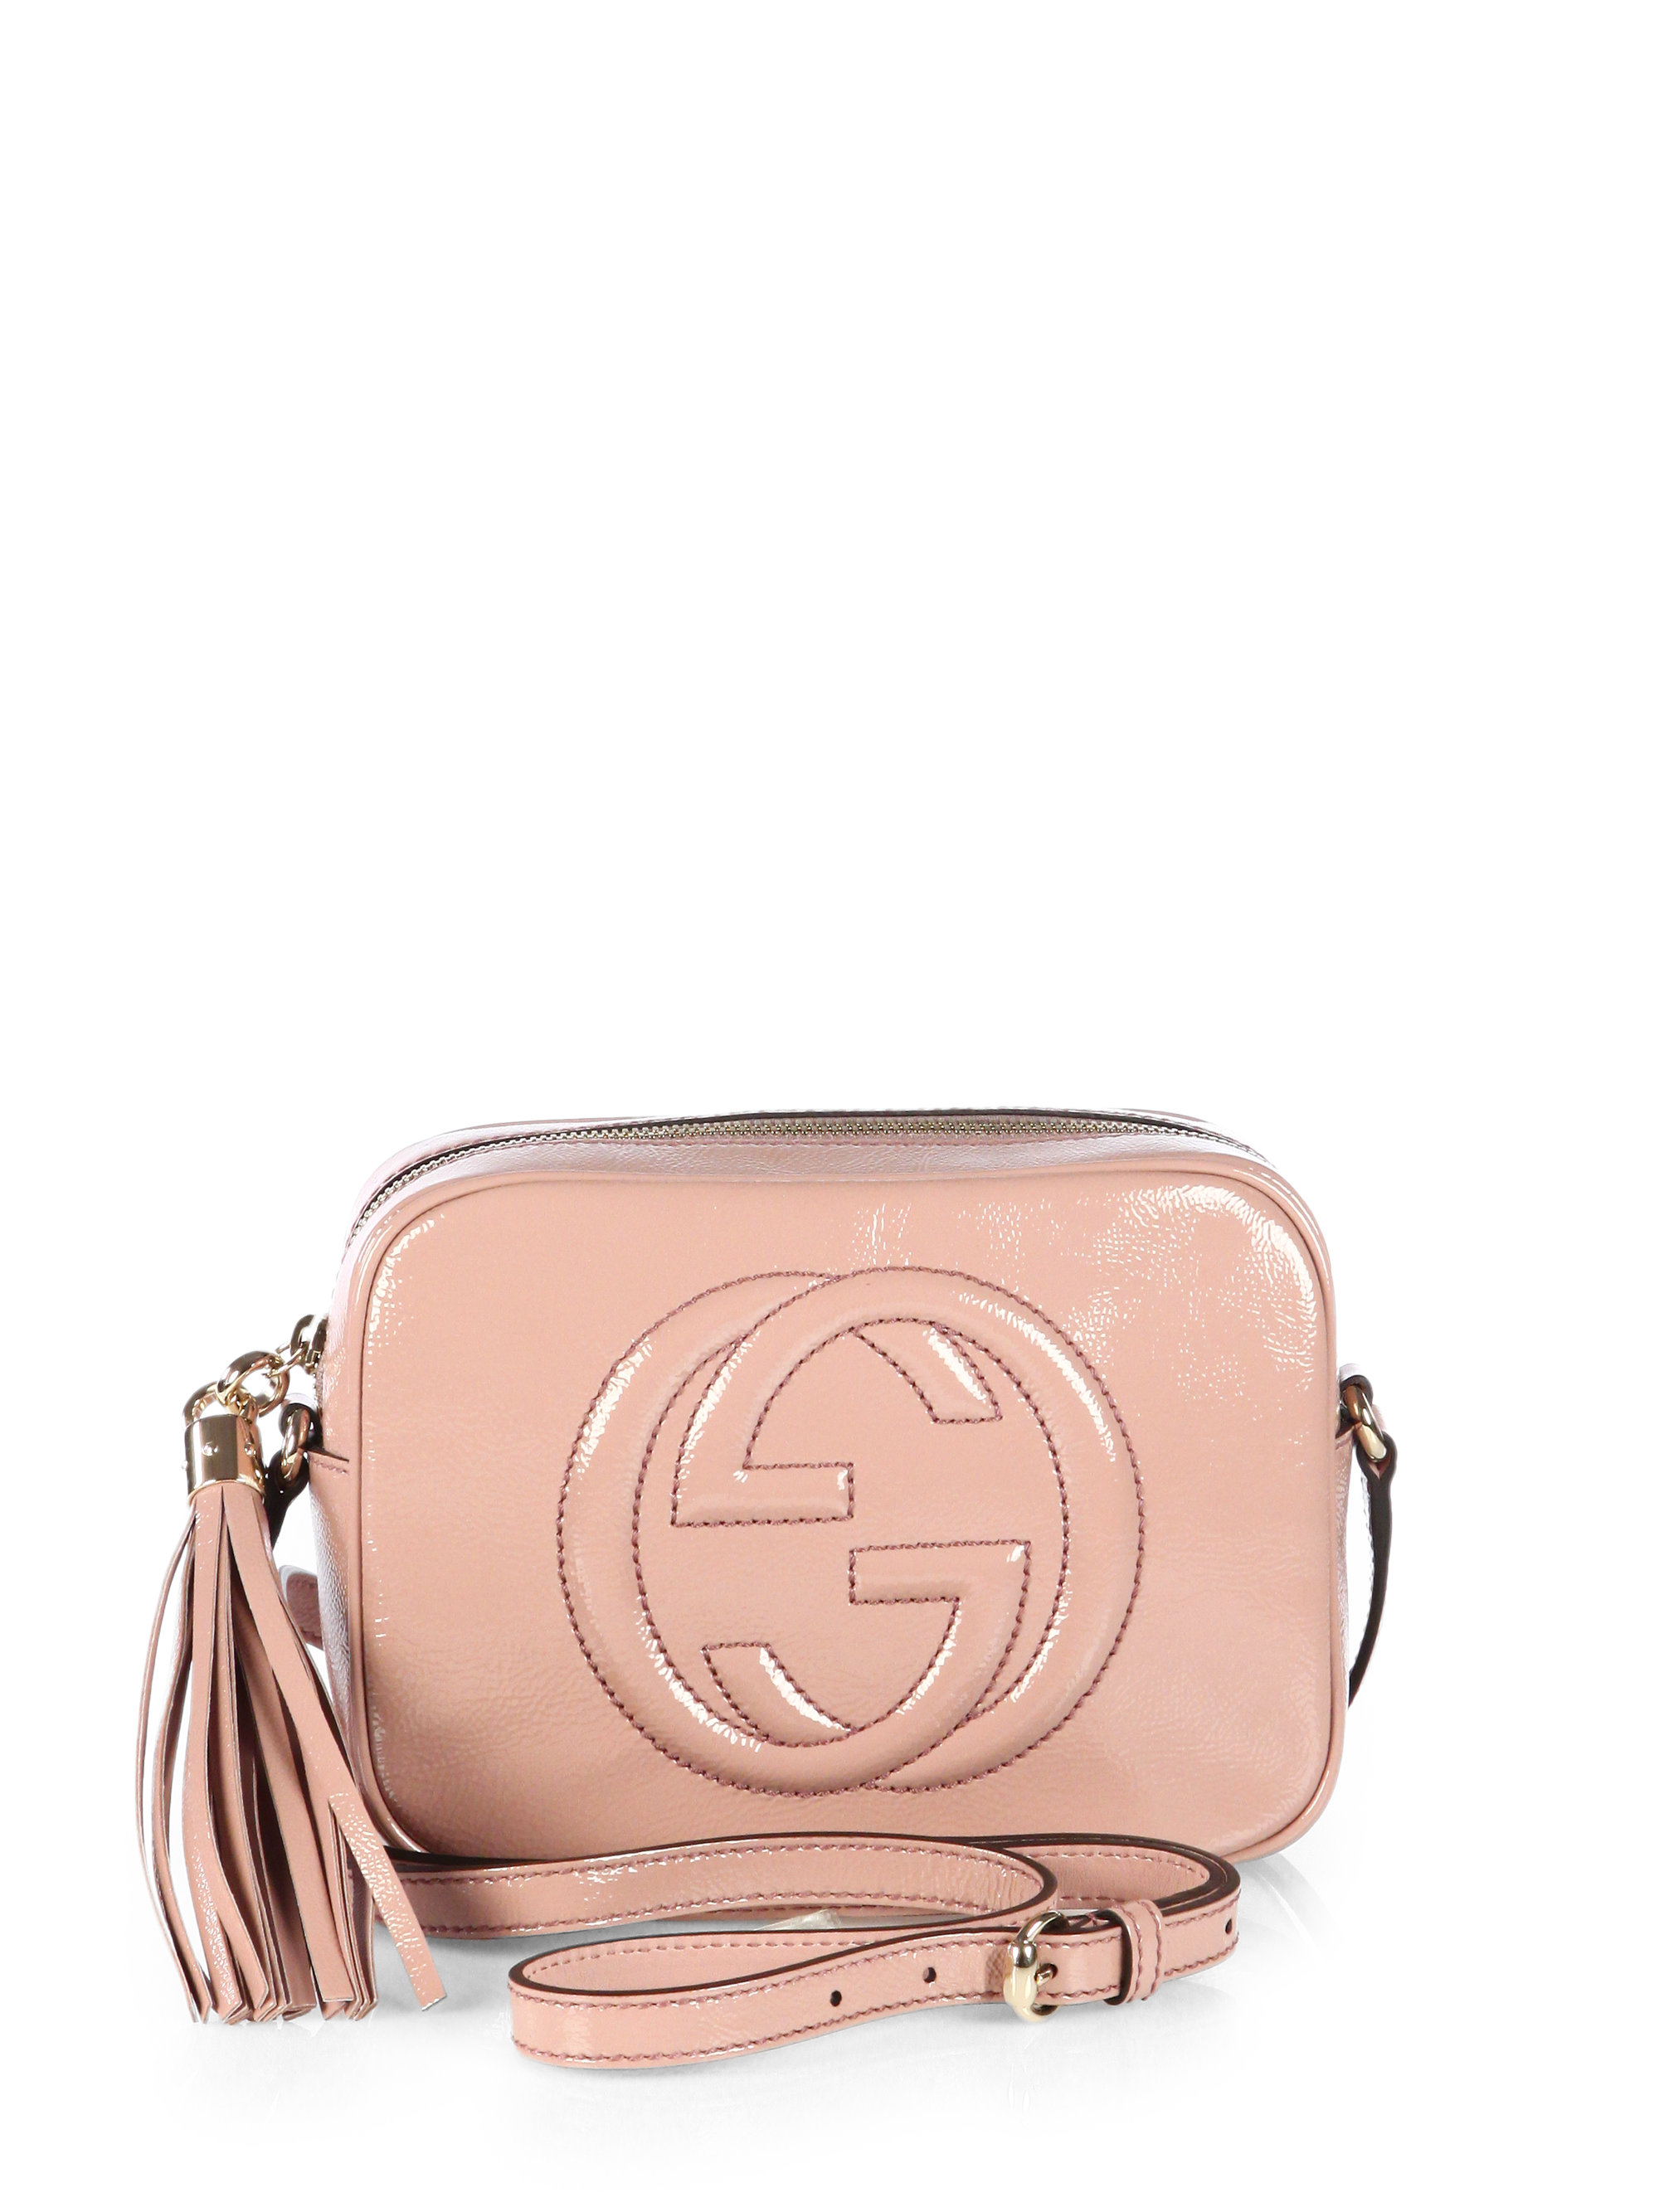 Gucci Soho Patent Leather Disco Bag in Pink | Lyst